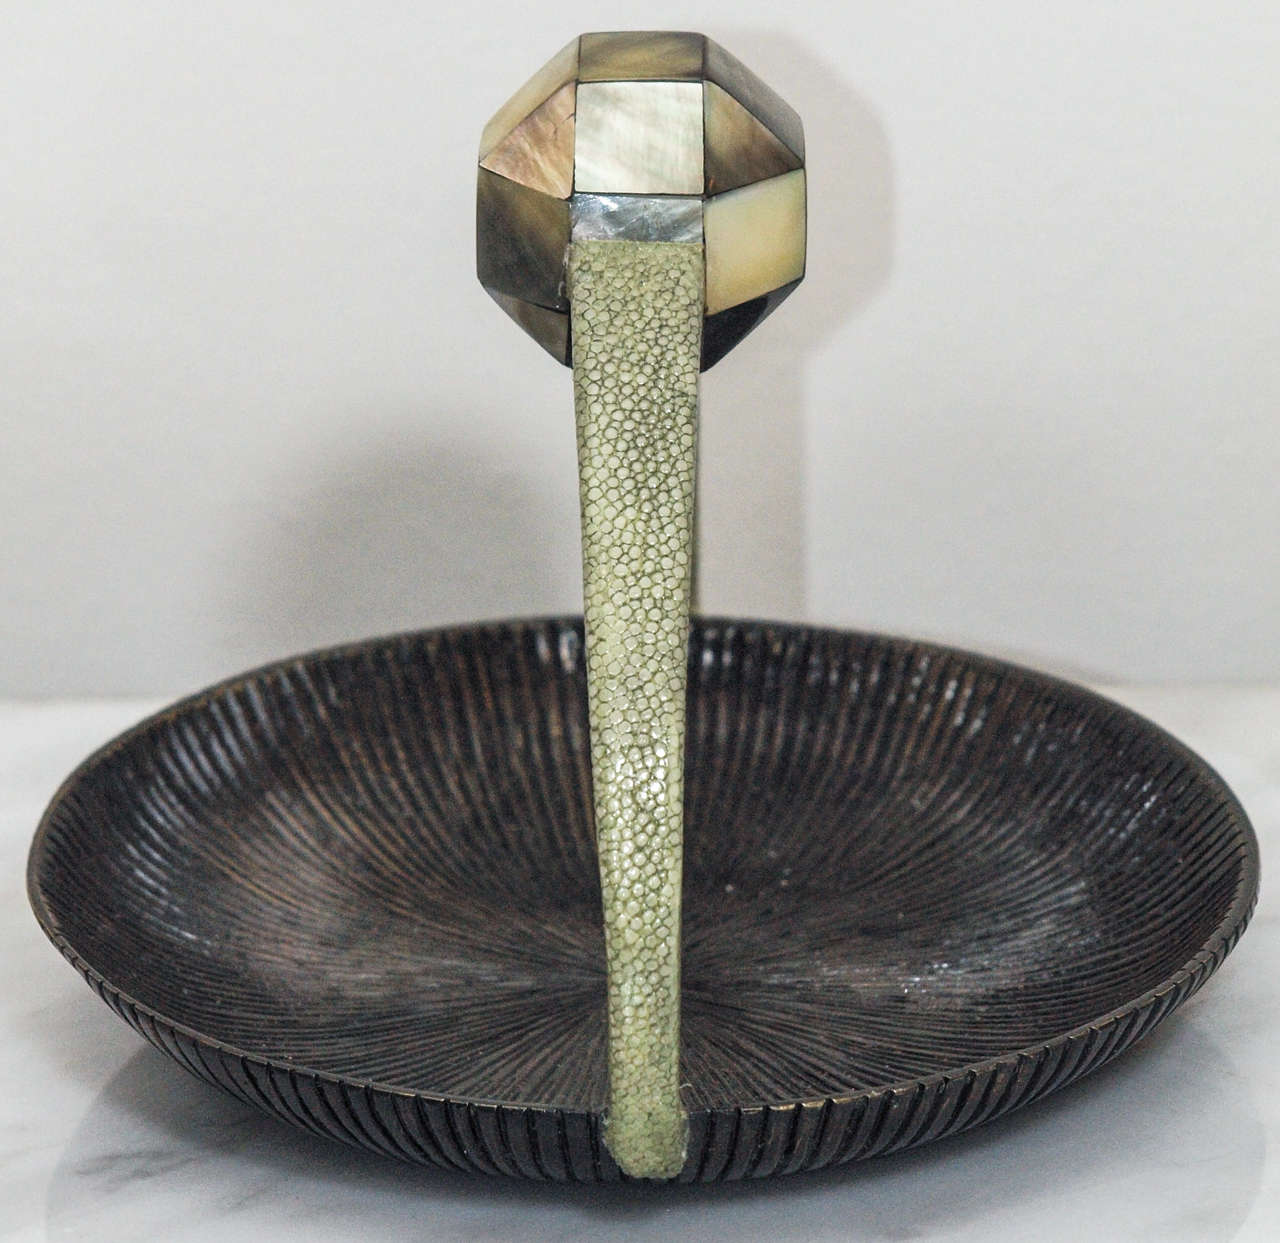 Small Bronze Vessel with Shagreen Handle, by R&Y Augousti, Paris 1